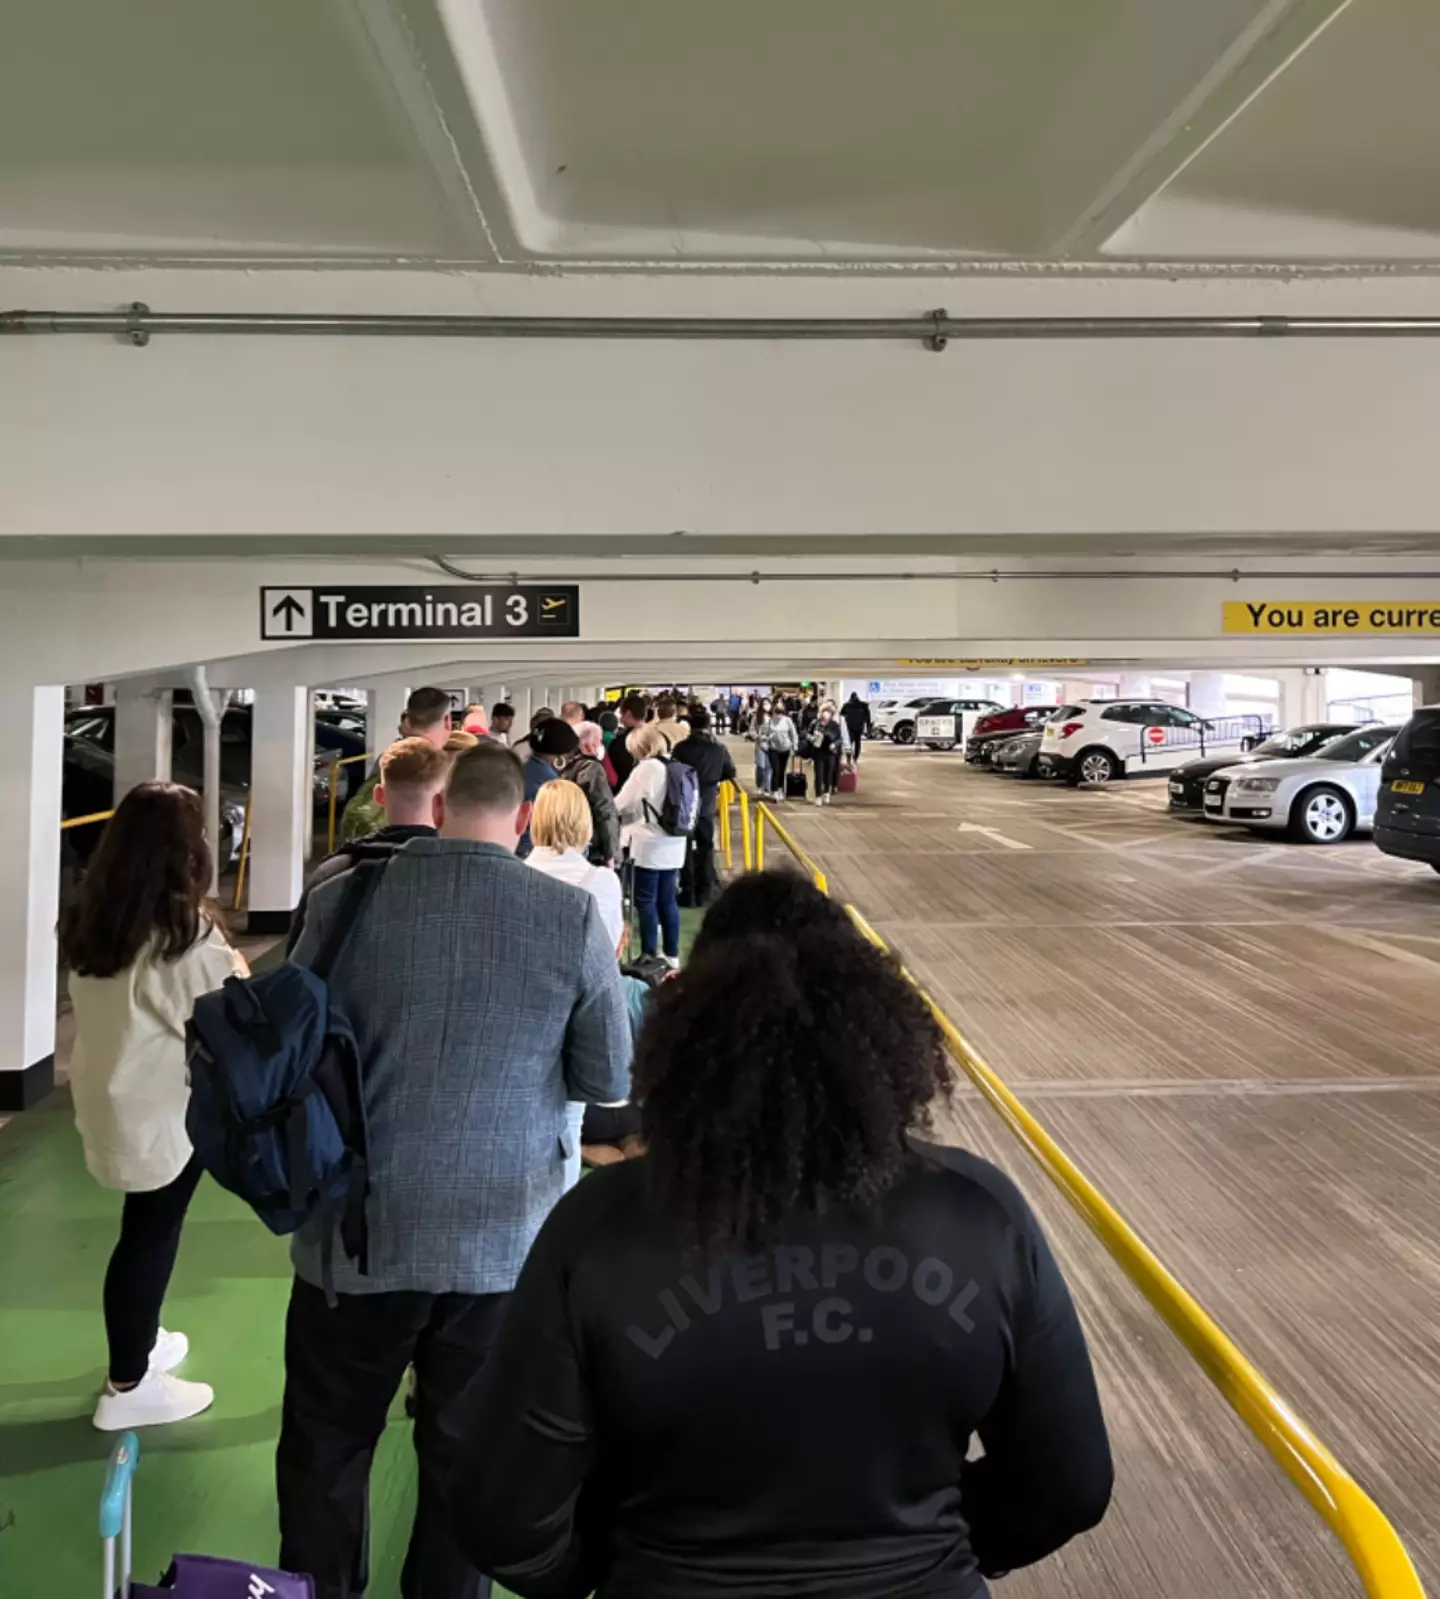 Pictures have emerged of queues at Manchester Airport snaking into the carpark.